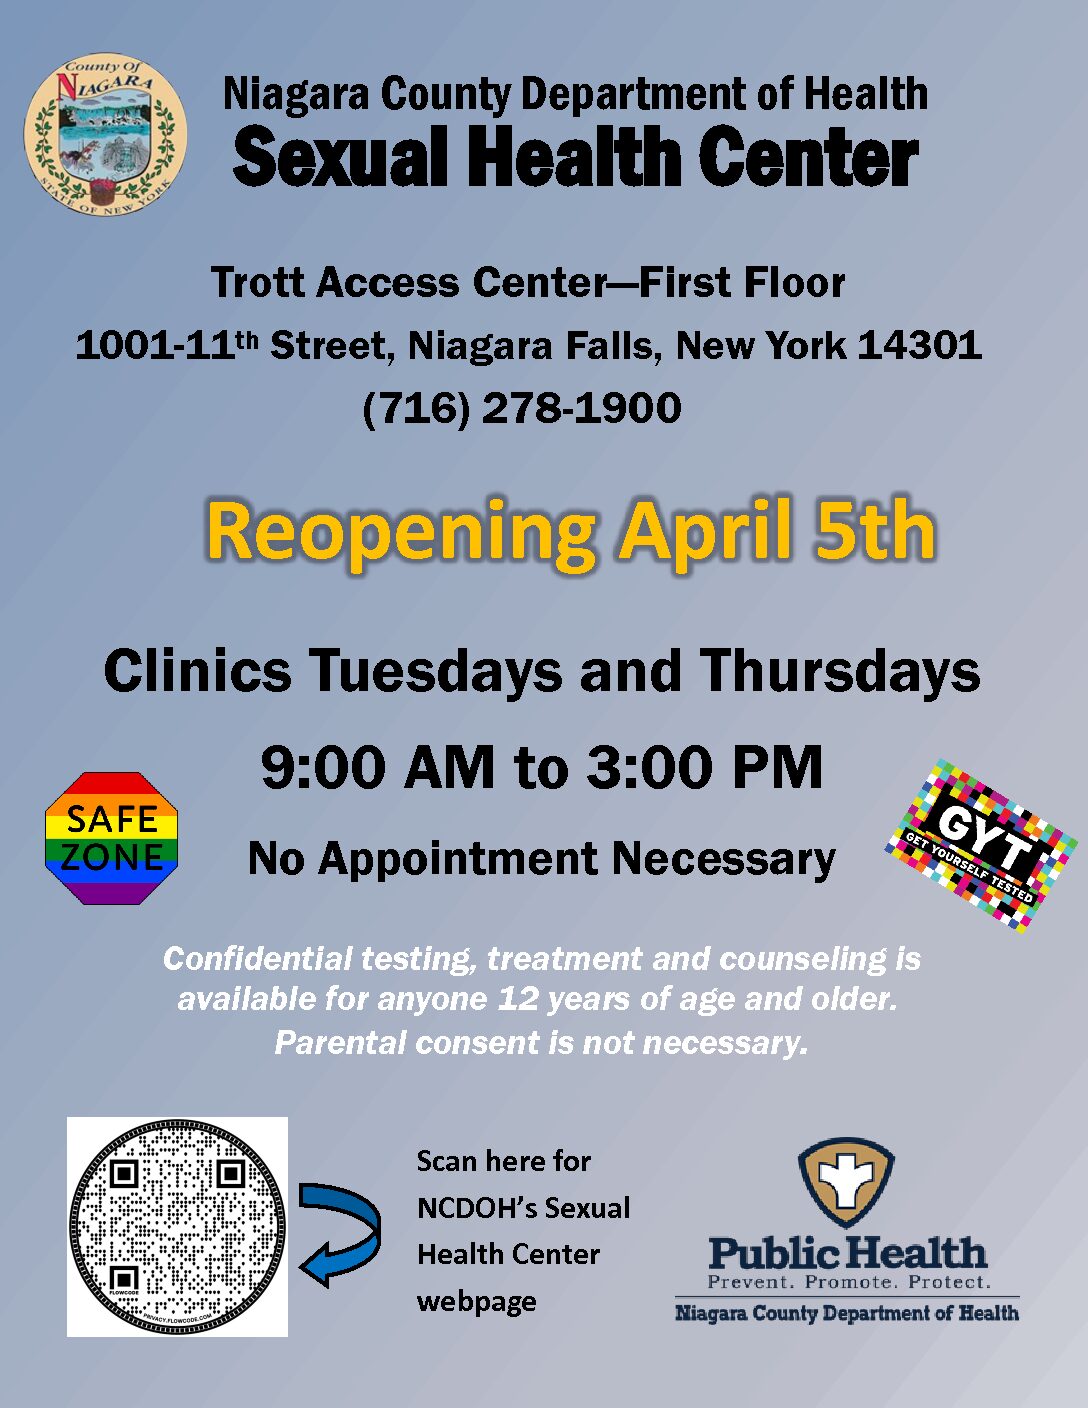 Niagara County Department of Health Announces Re-Opening of Sexual Health Clinic